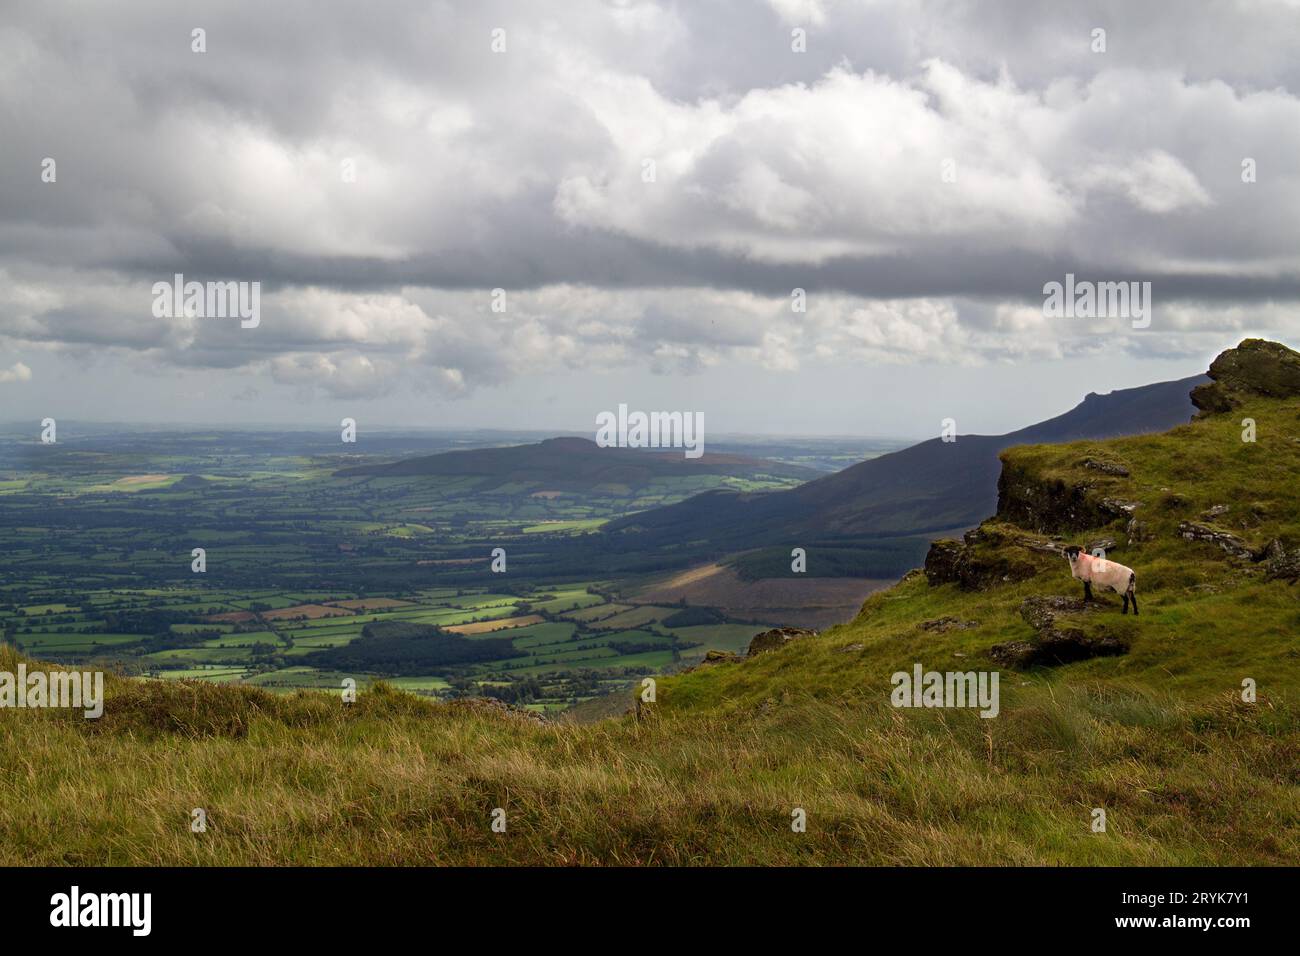 View from the mountain Knocksheegowna in the Comeragh mountains on Ireland's County Tipperary, in the foregroud a sheep Stock Photo